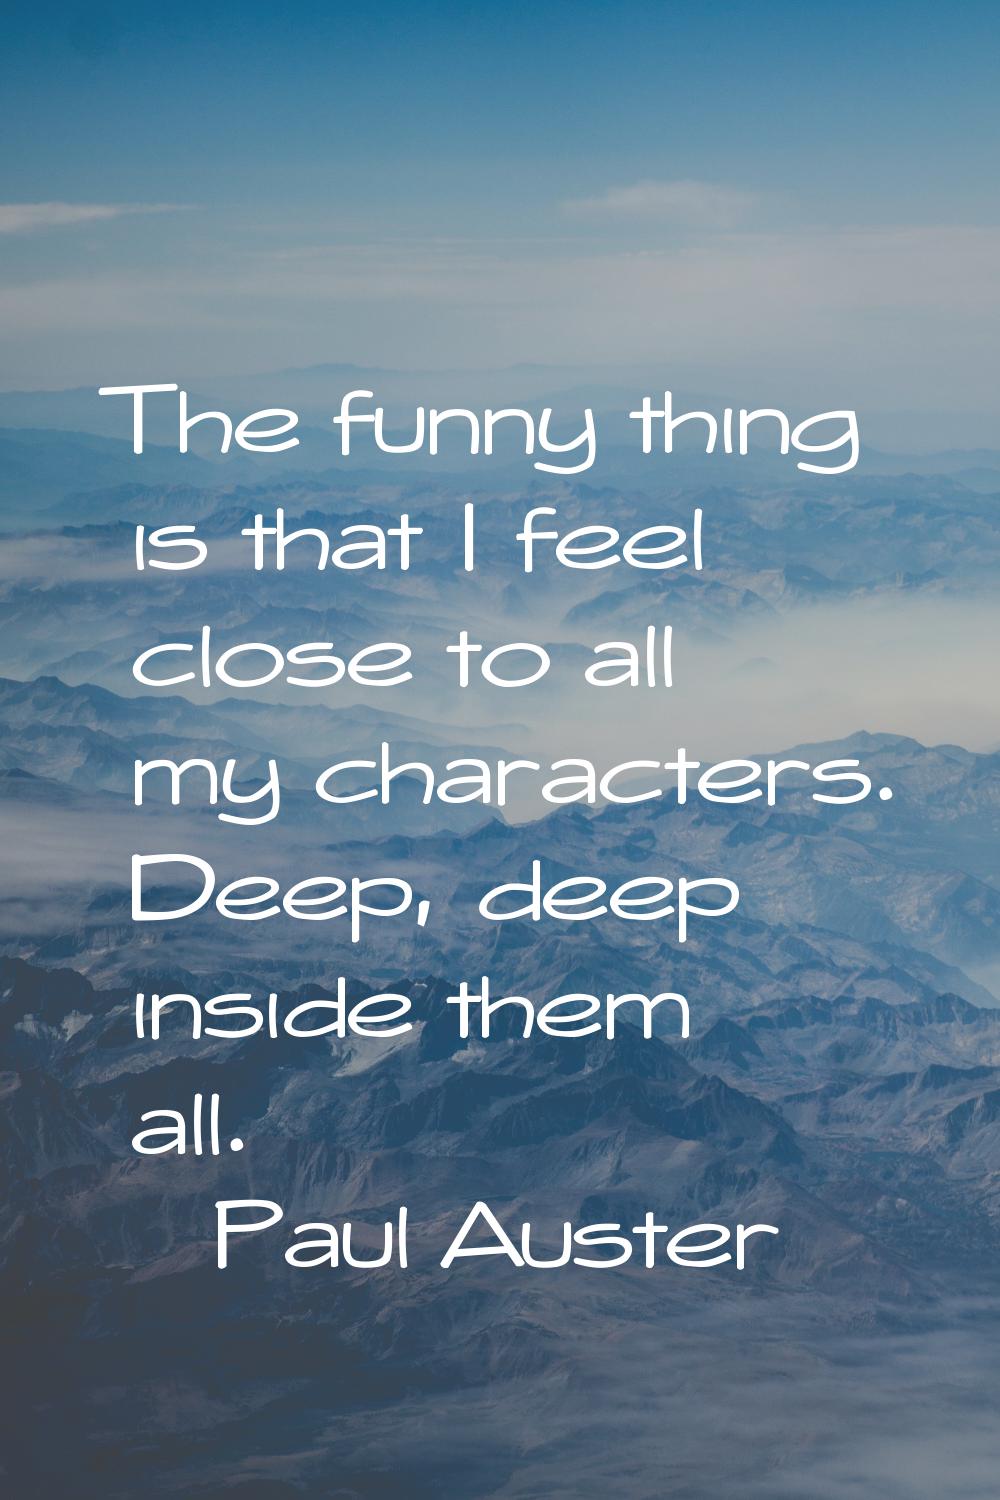 The funny thing is that I feel close to all my characters. Deep, deep inside them all.